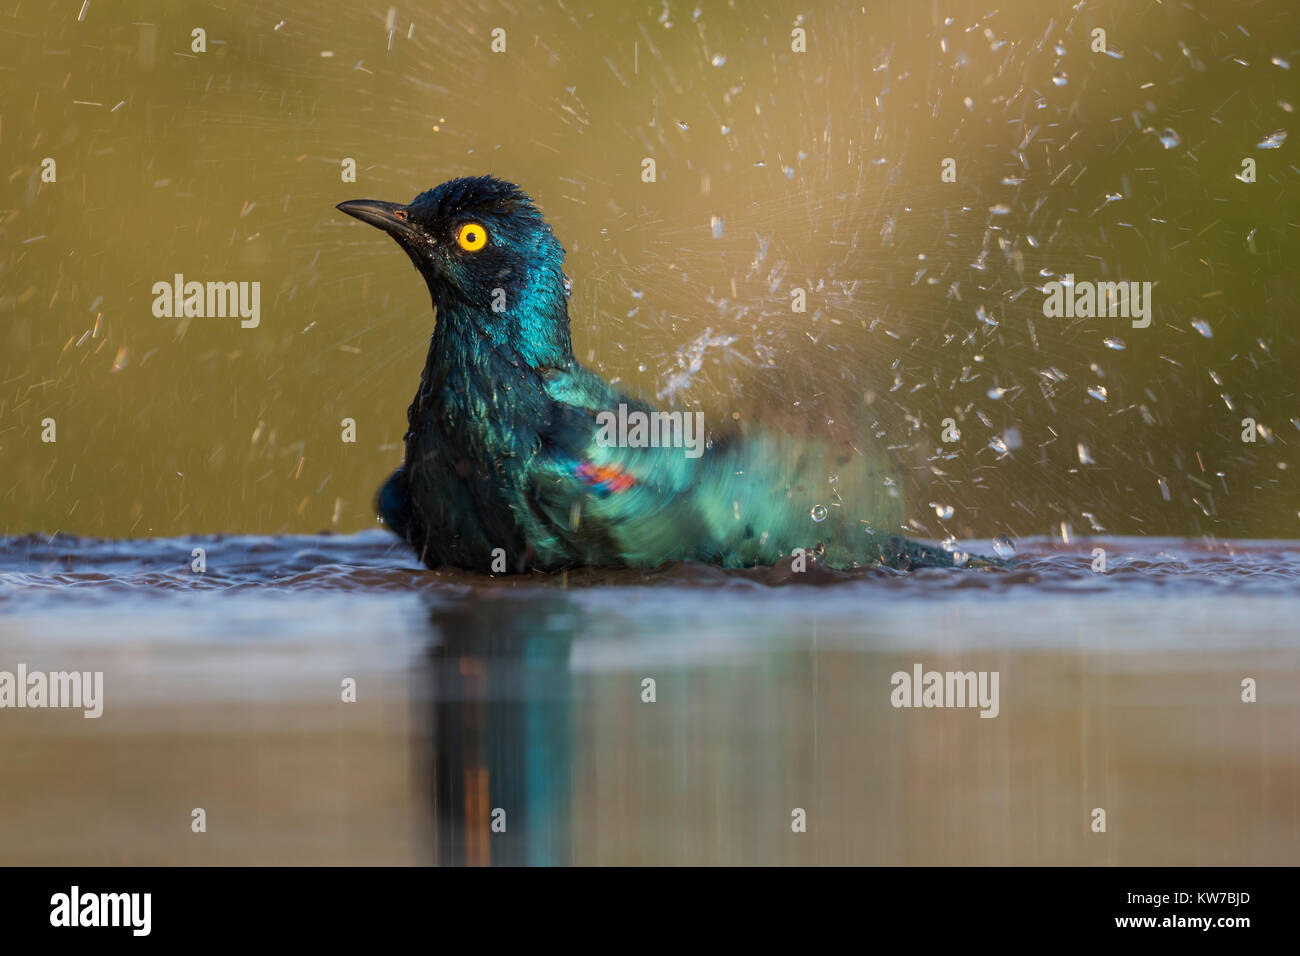 Cape glossy starling (Lamprotornis nitens) bathing, Zimanga private game reserve, South Africa, June 2017 Stock Photo